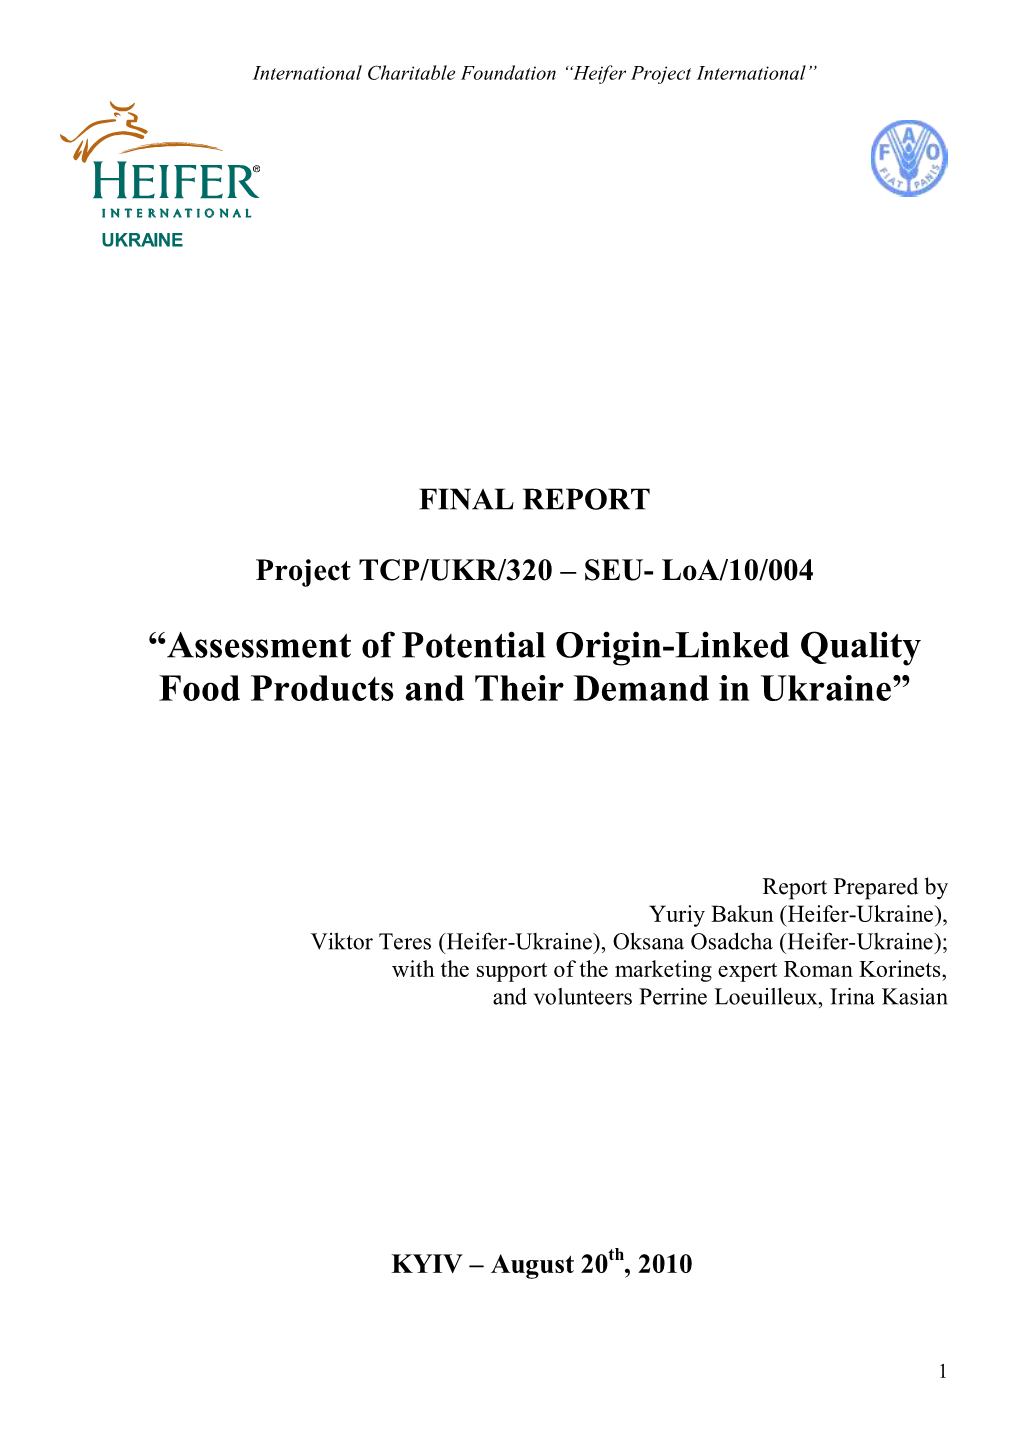 “Assessment of Potential Origin-Linked Quality Food Products and Their Demand in Ukraine”